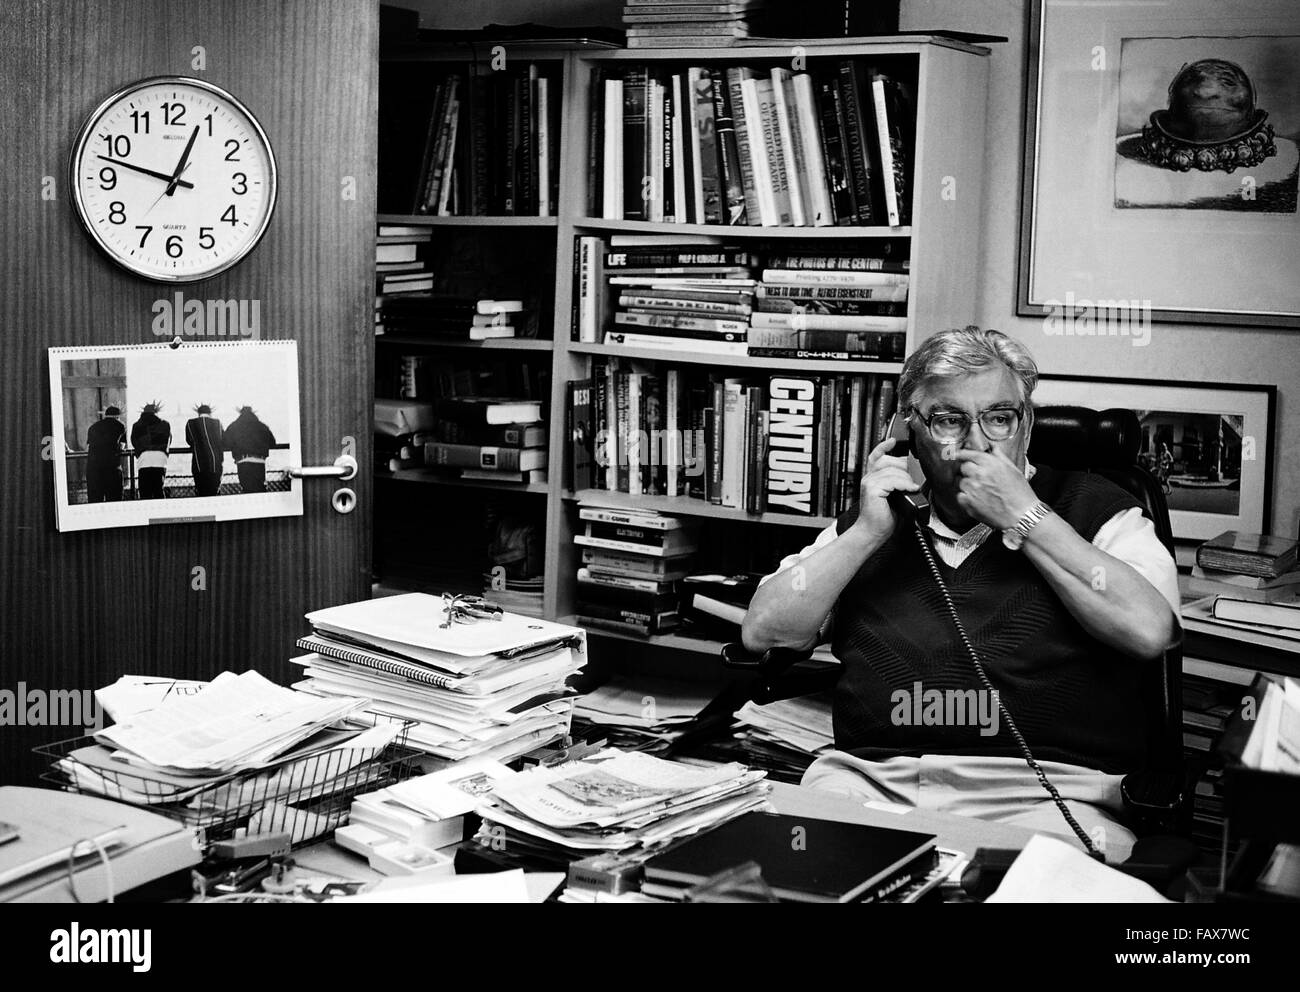 AJAXNETPHOTO. 2003. LONDON, ENGLAND. - ASSOCIATED PRESS PHOTO EDITOR - TWO TIME PULLITZER PRIZE WINNER HORST FAAS, EUROPEAN AND MIDDLE EAST WIRE AGENCY NEWS PHOTO-EDITOR AT WORK IN HIS LONDON OFFICE. PHOTO:JONATHAN EASTLAND/AJAX REF:CD4307BW 33 1A Stock Photo